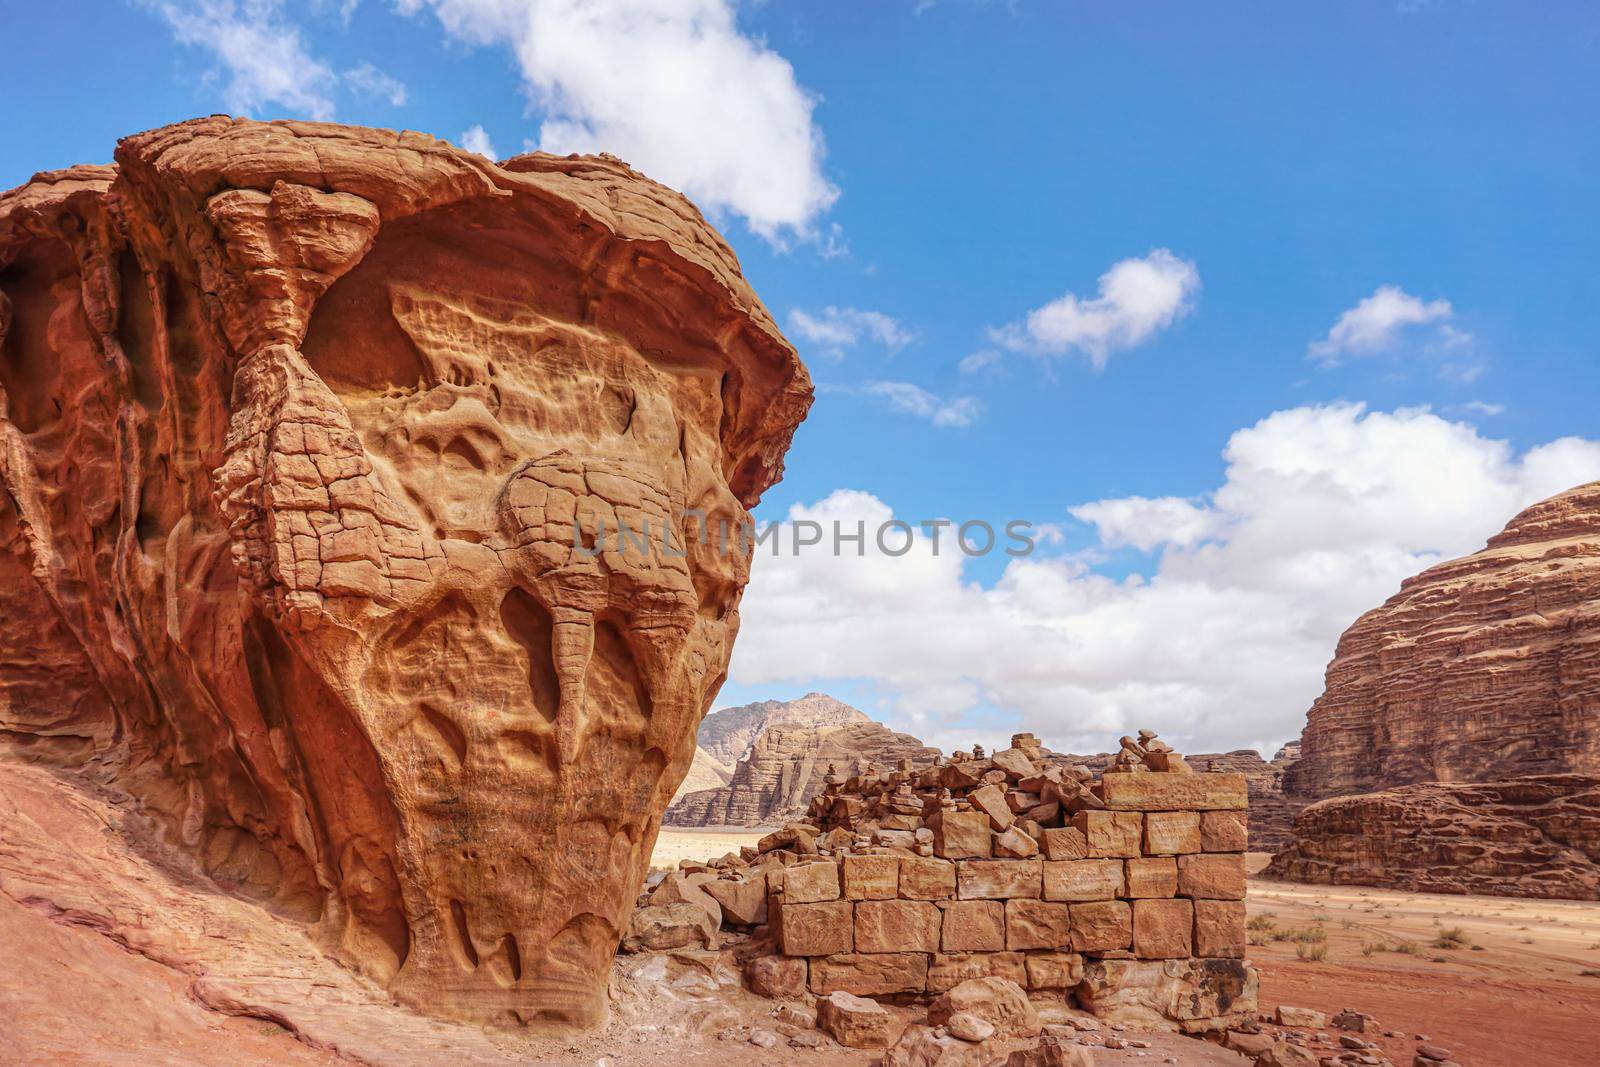 Stone bricks wall remains with rocky cliffs near on Wadi Rum desert near Lawrence's Spring tourist spot.